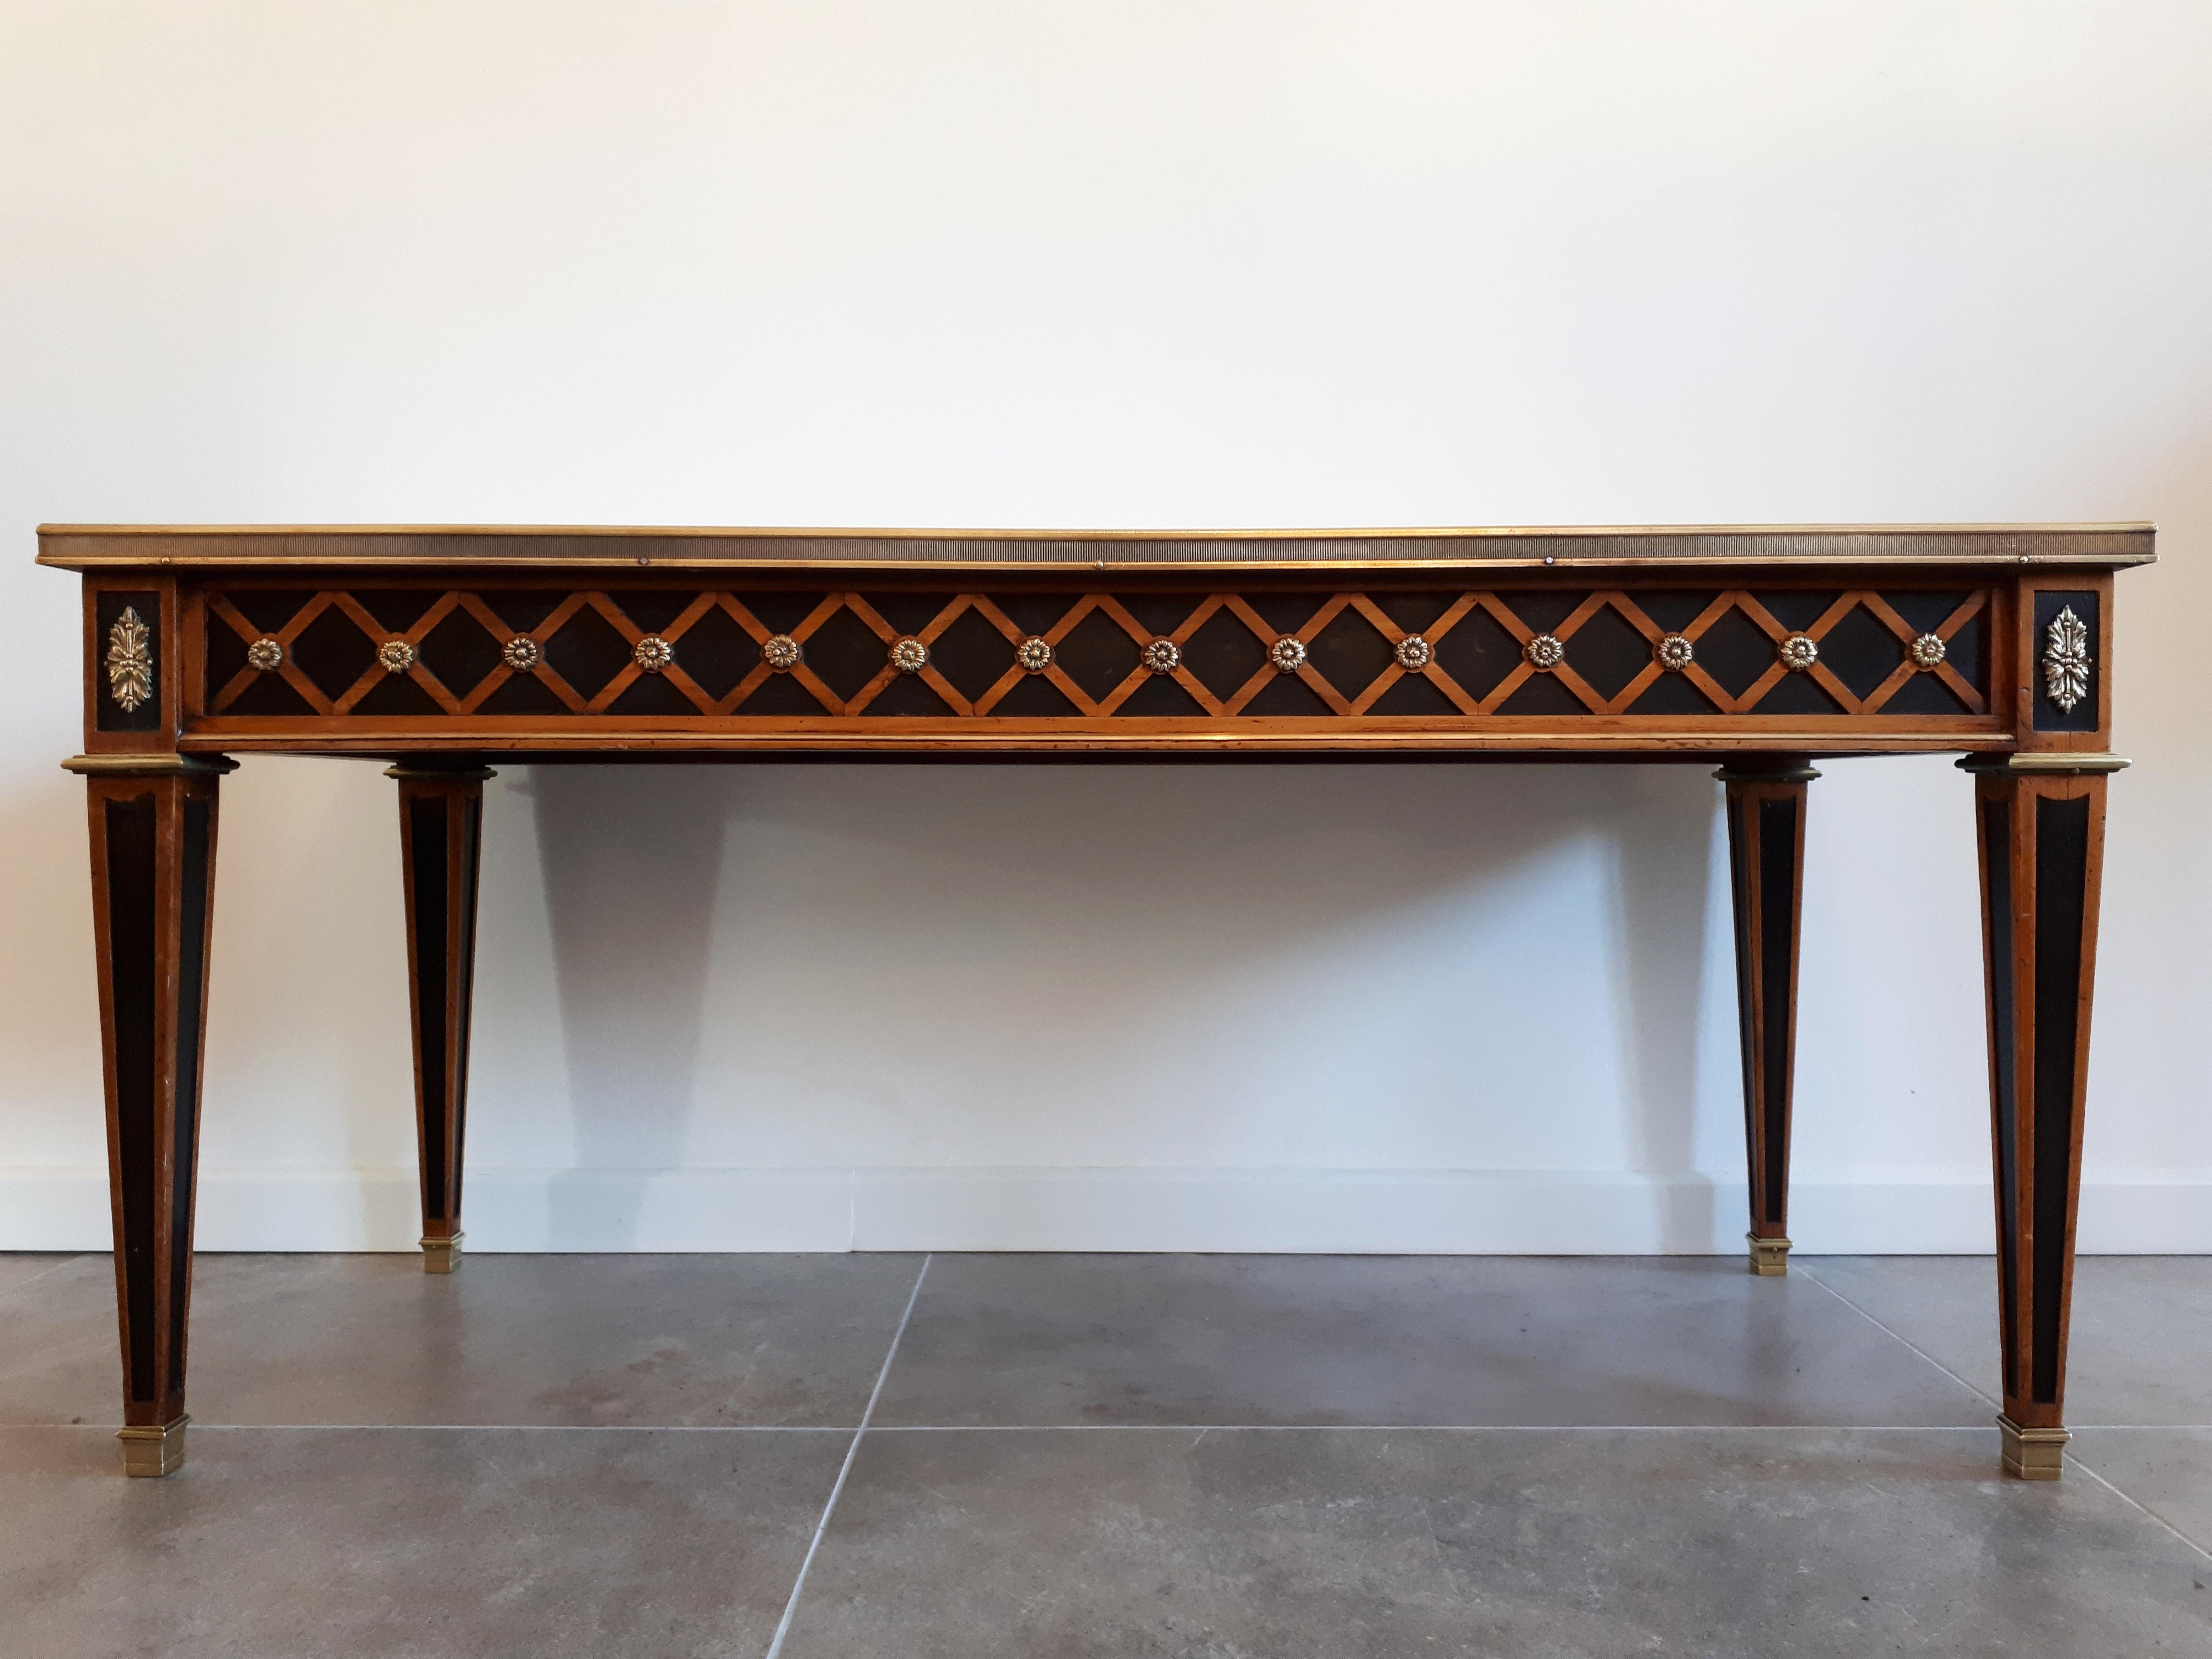 Antique coffee table with bronze contour and ornaments, white Carrara marble top and lozenge pattern marquetry.